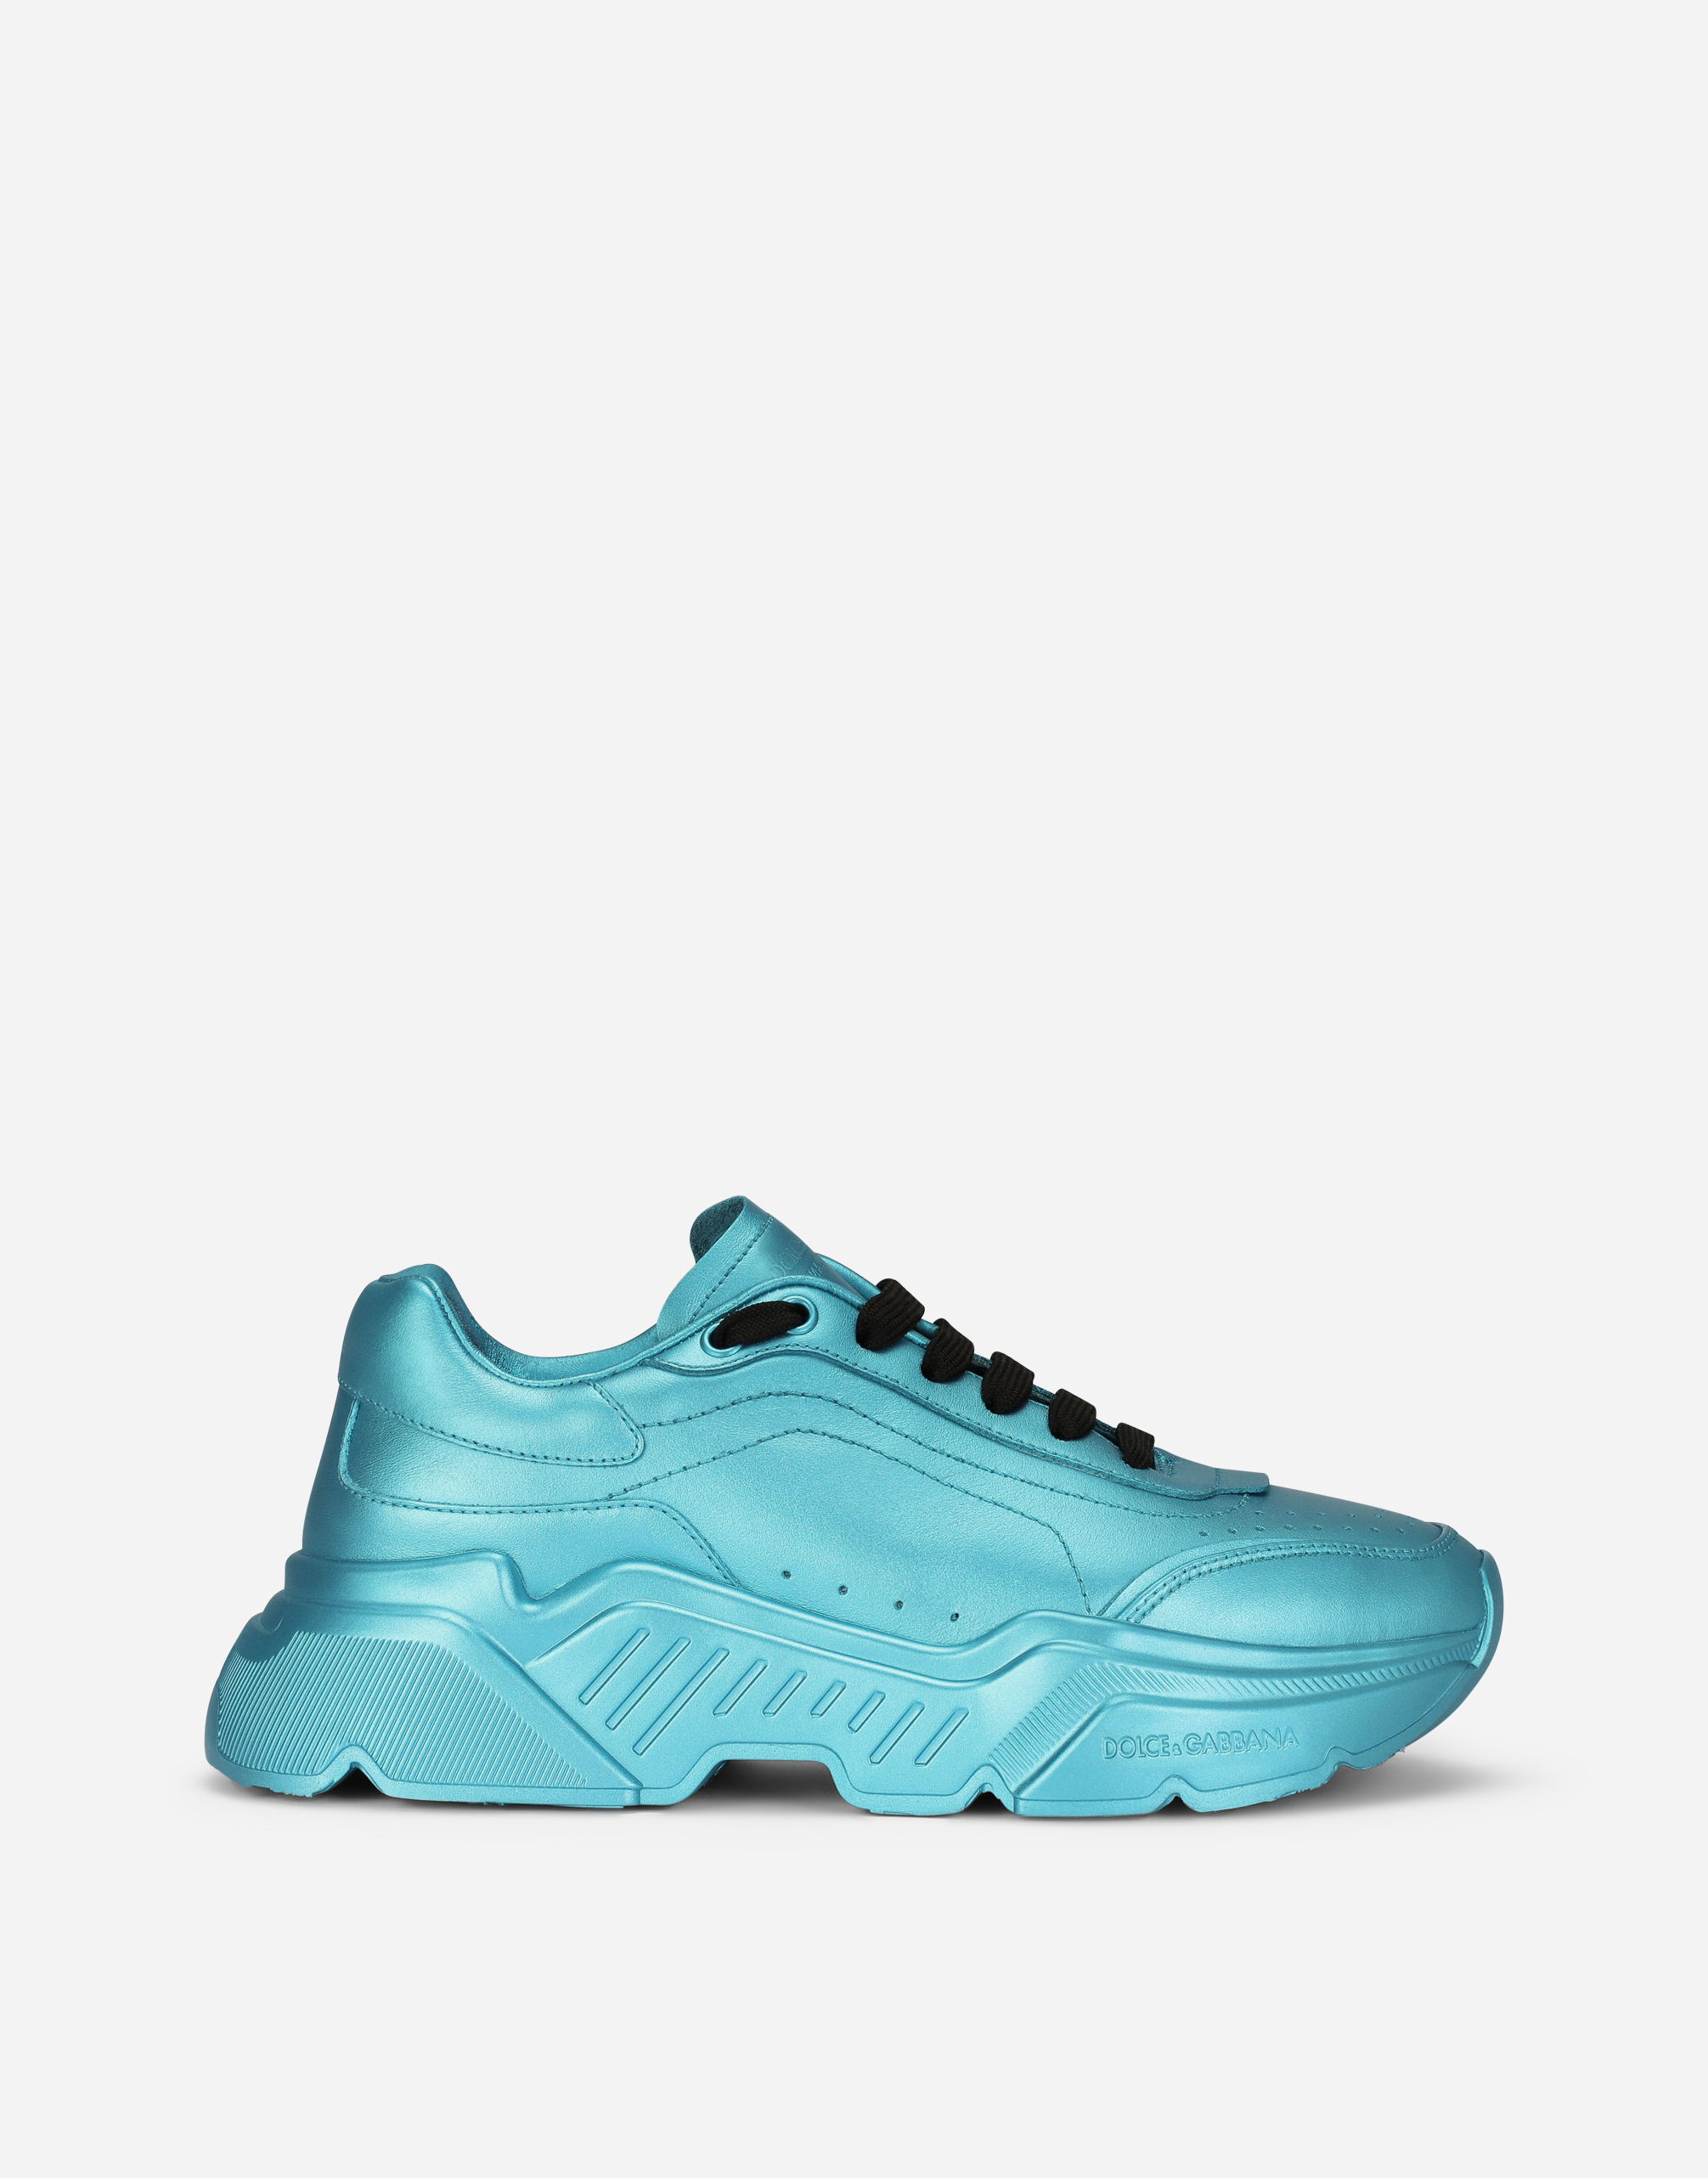 Foiled-effect calfskin nappa Daymaster sneakers in Turquoise